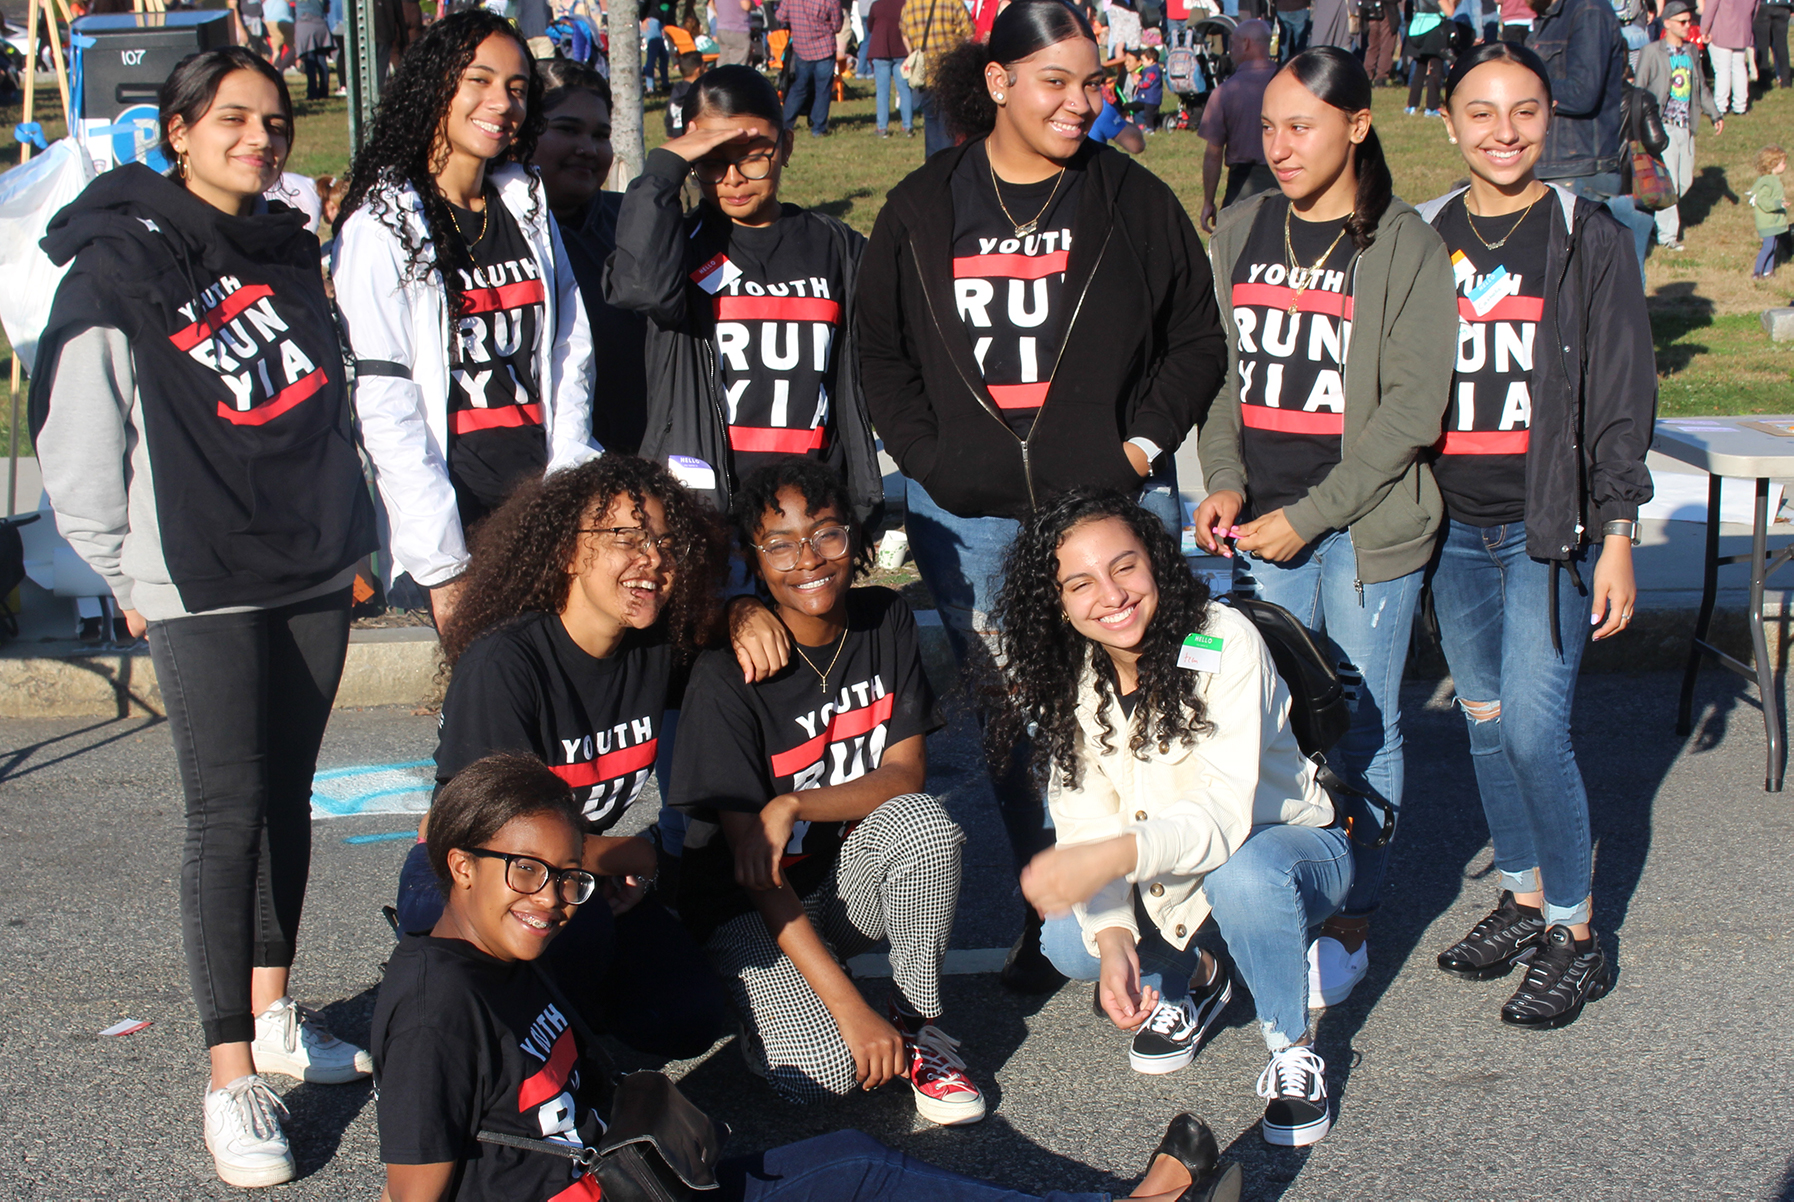 a group of young adults smiling and wearing tshirts that read "Youth Run YIA"